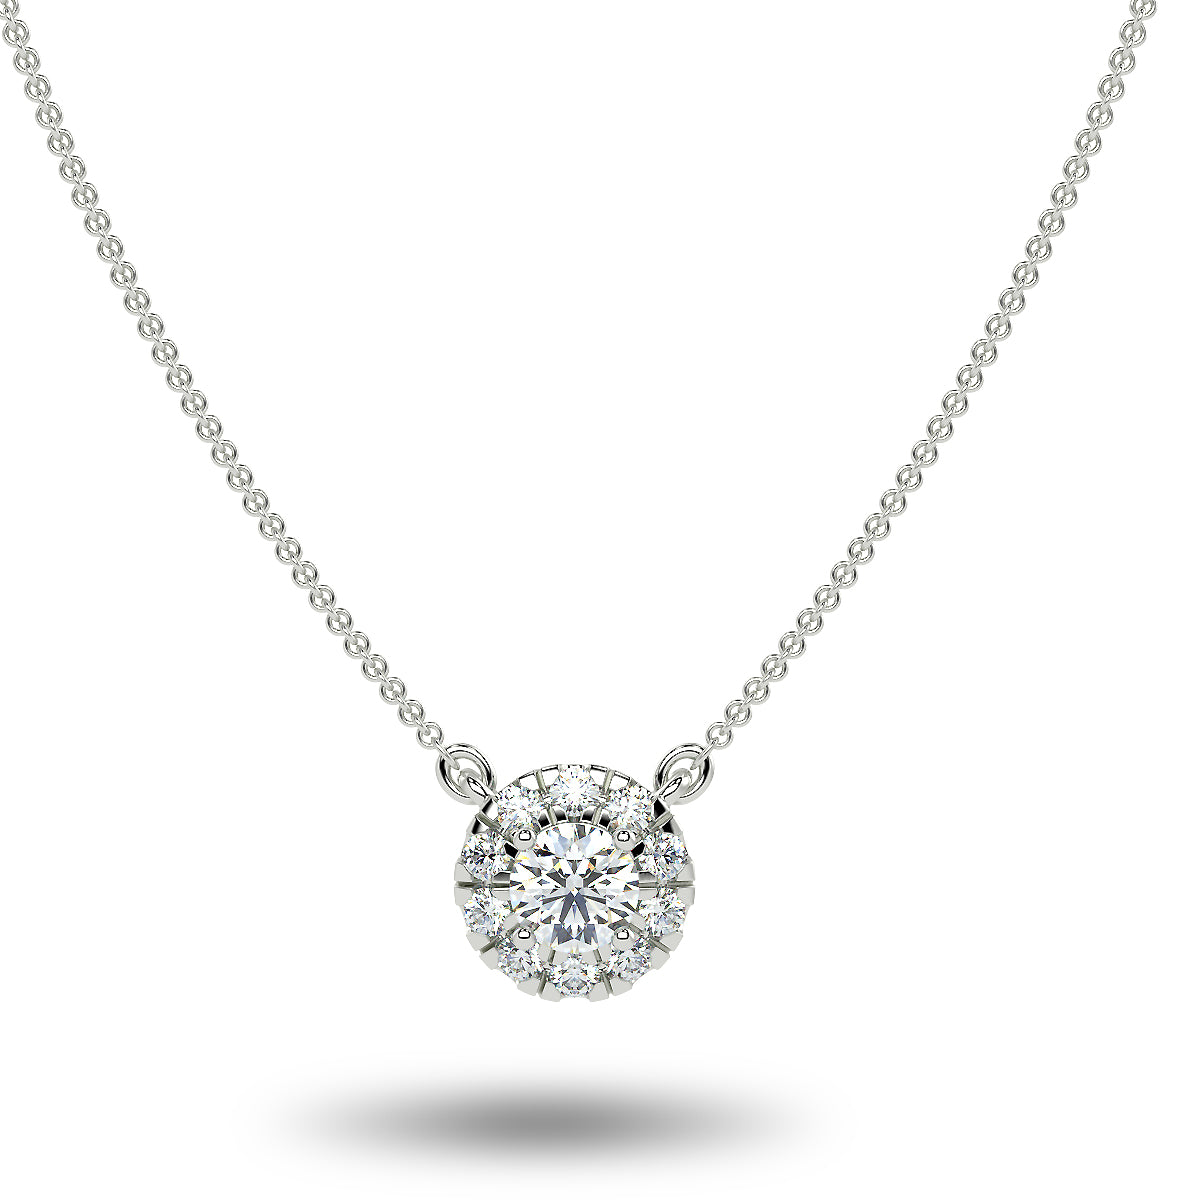 Mira Necklace - White Gold (0.53 Ct. Tw.)